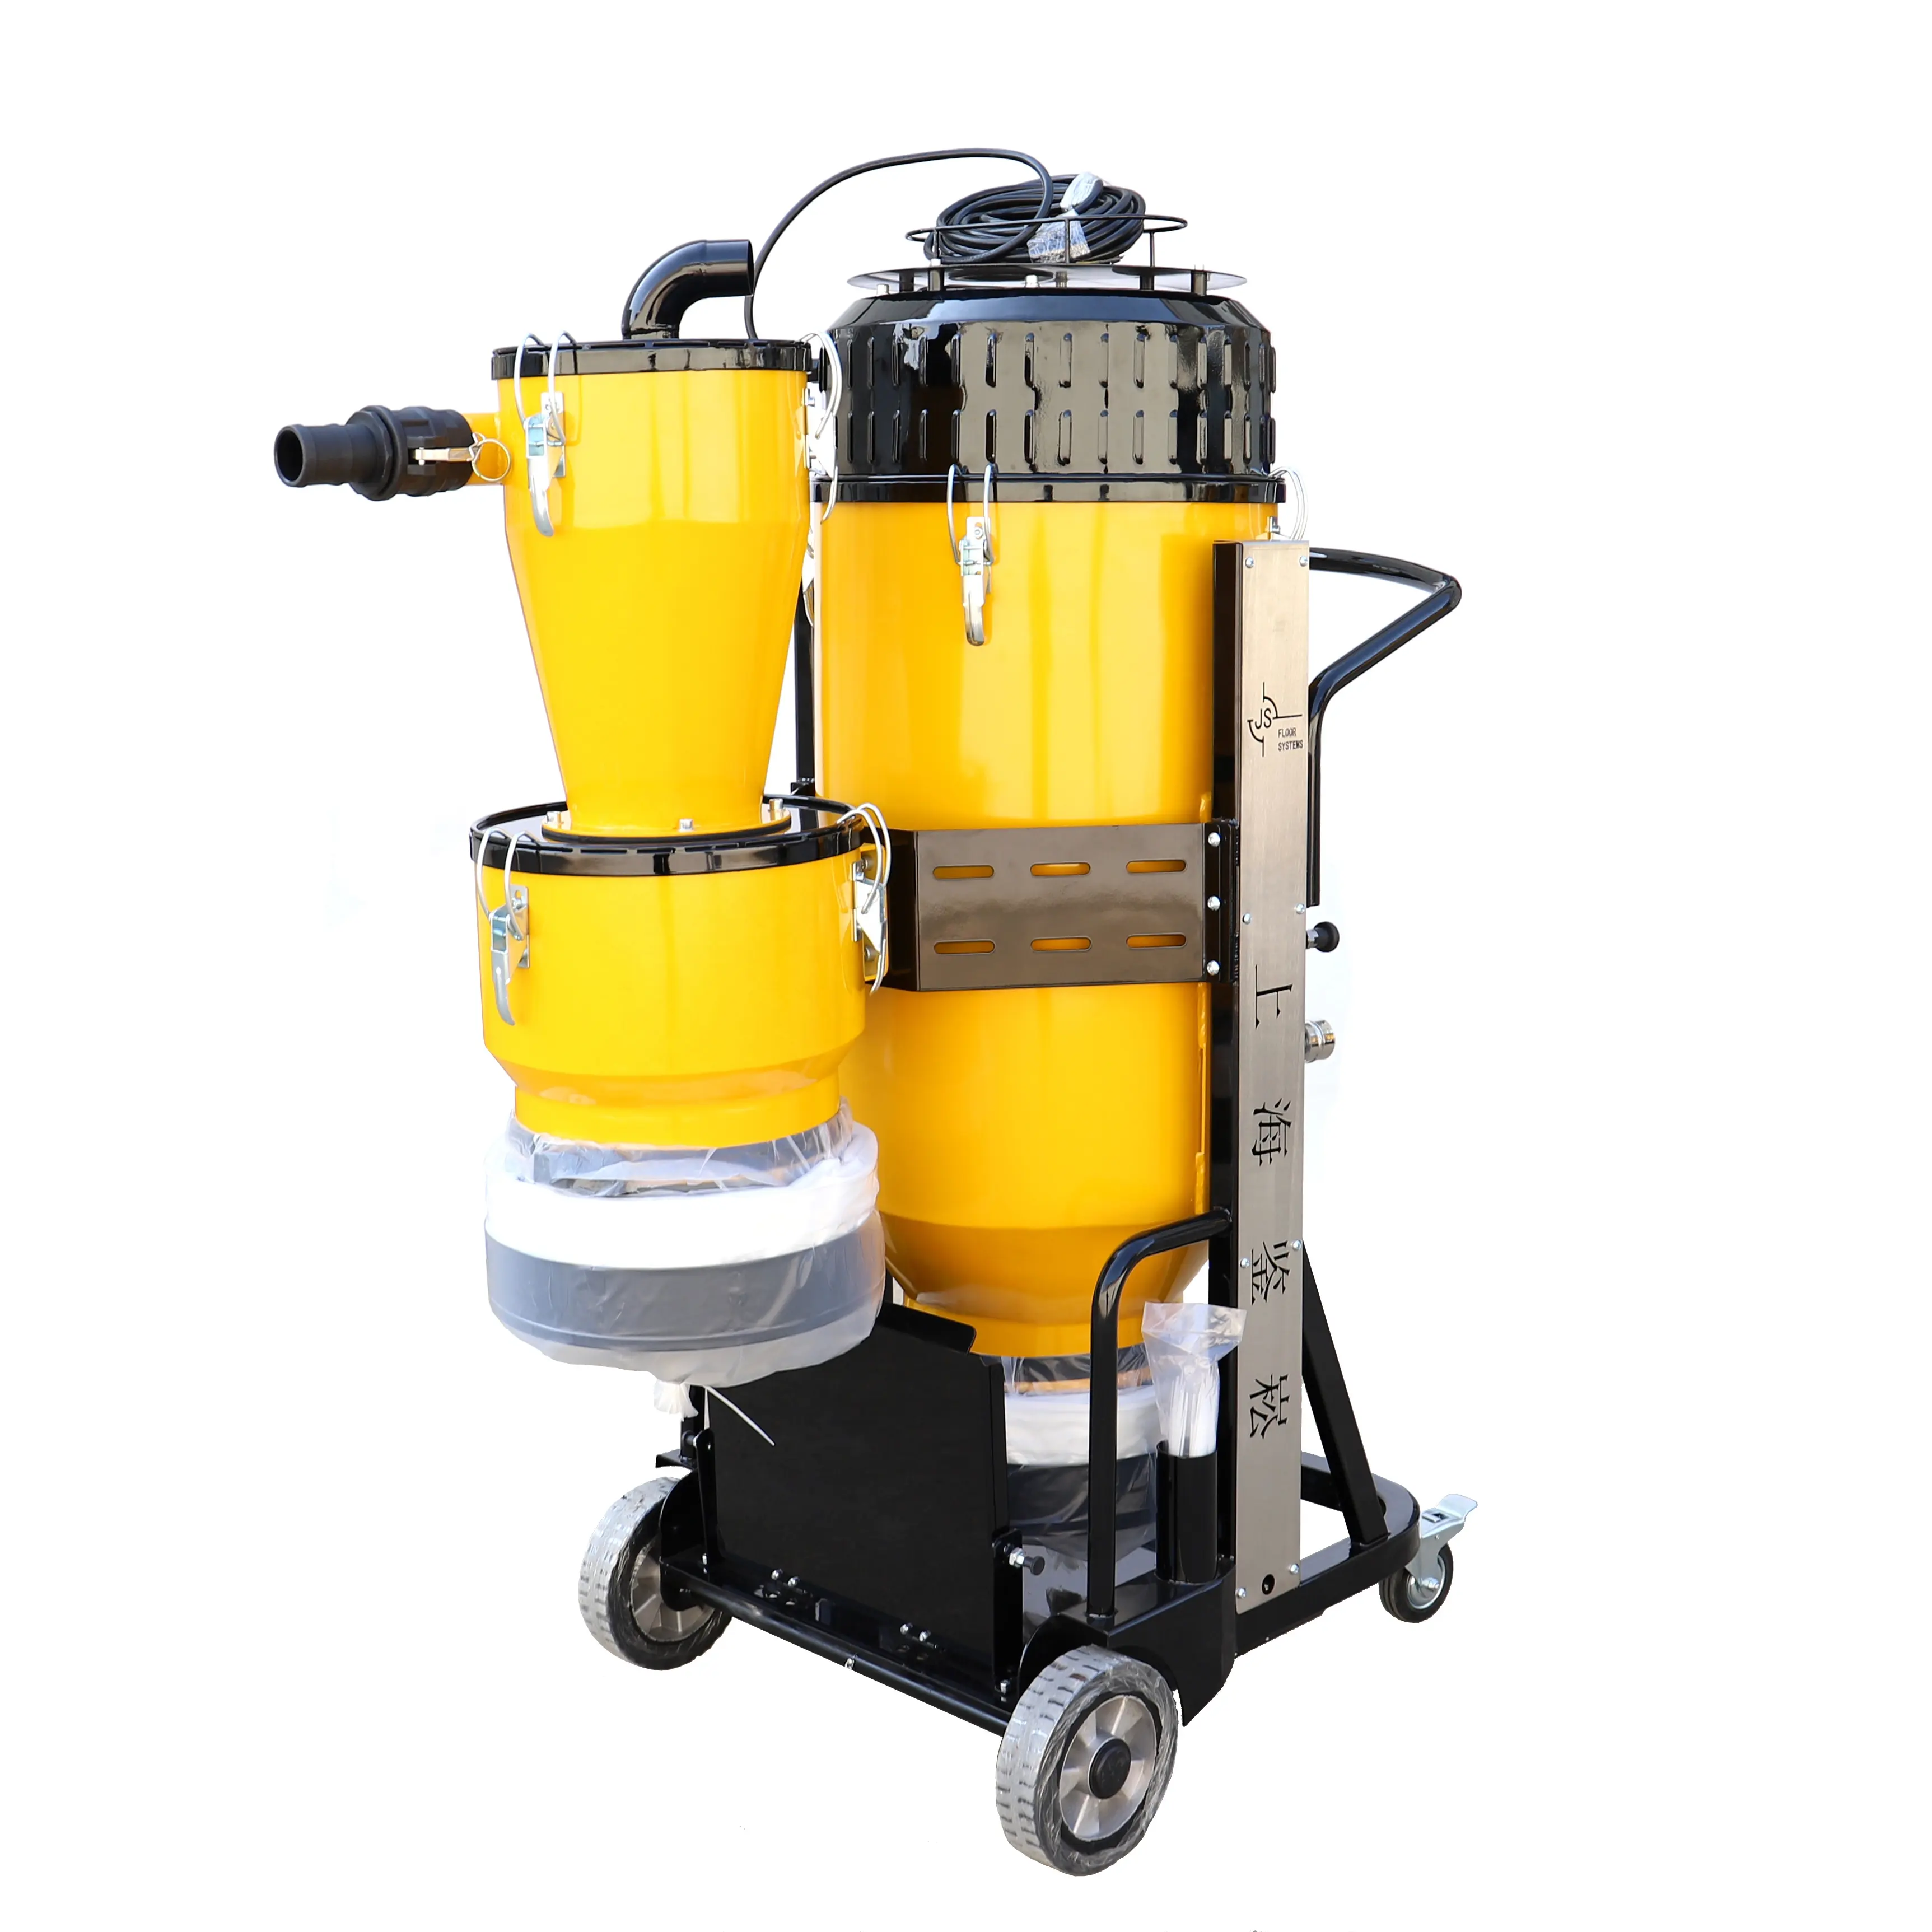 3.3kw V3 Dust Collector Industrial Vacuum Extractor Cleaner